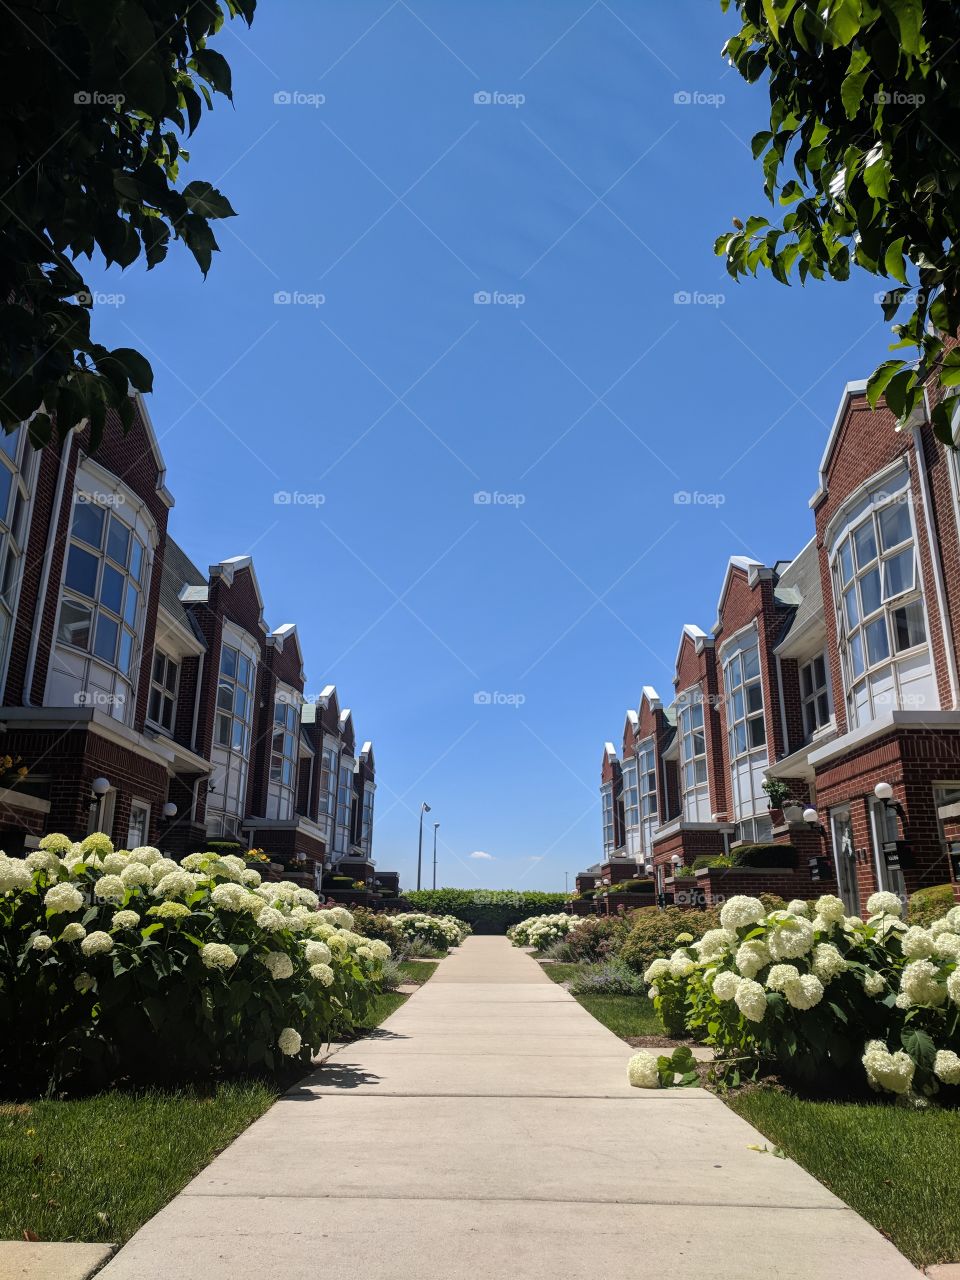 Townhomes against a blue sky